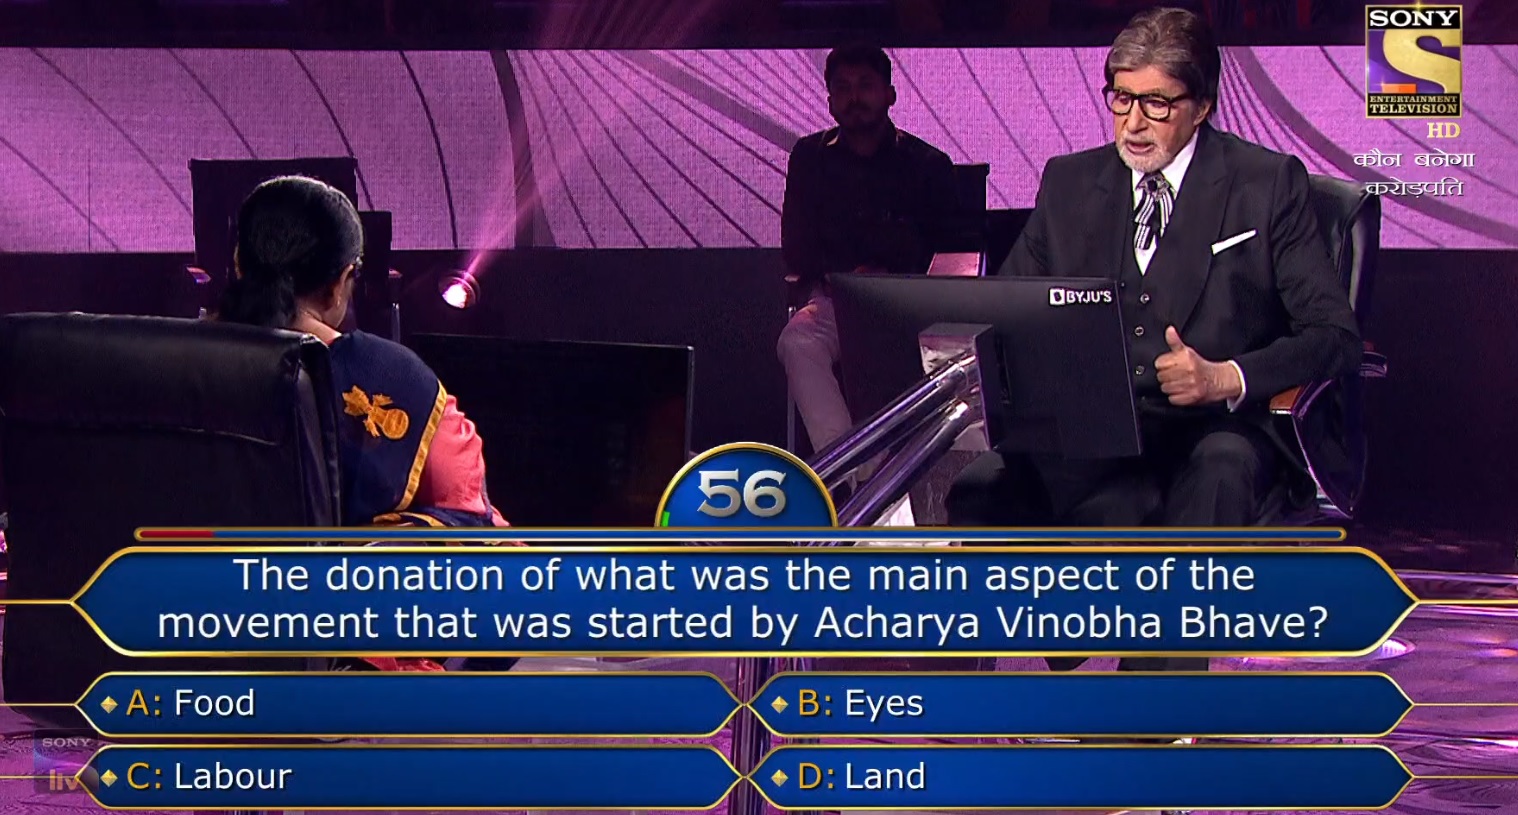 Ques : The donation of what was the main aspect of the movement that was started by Acharya Vinobha Bhave?